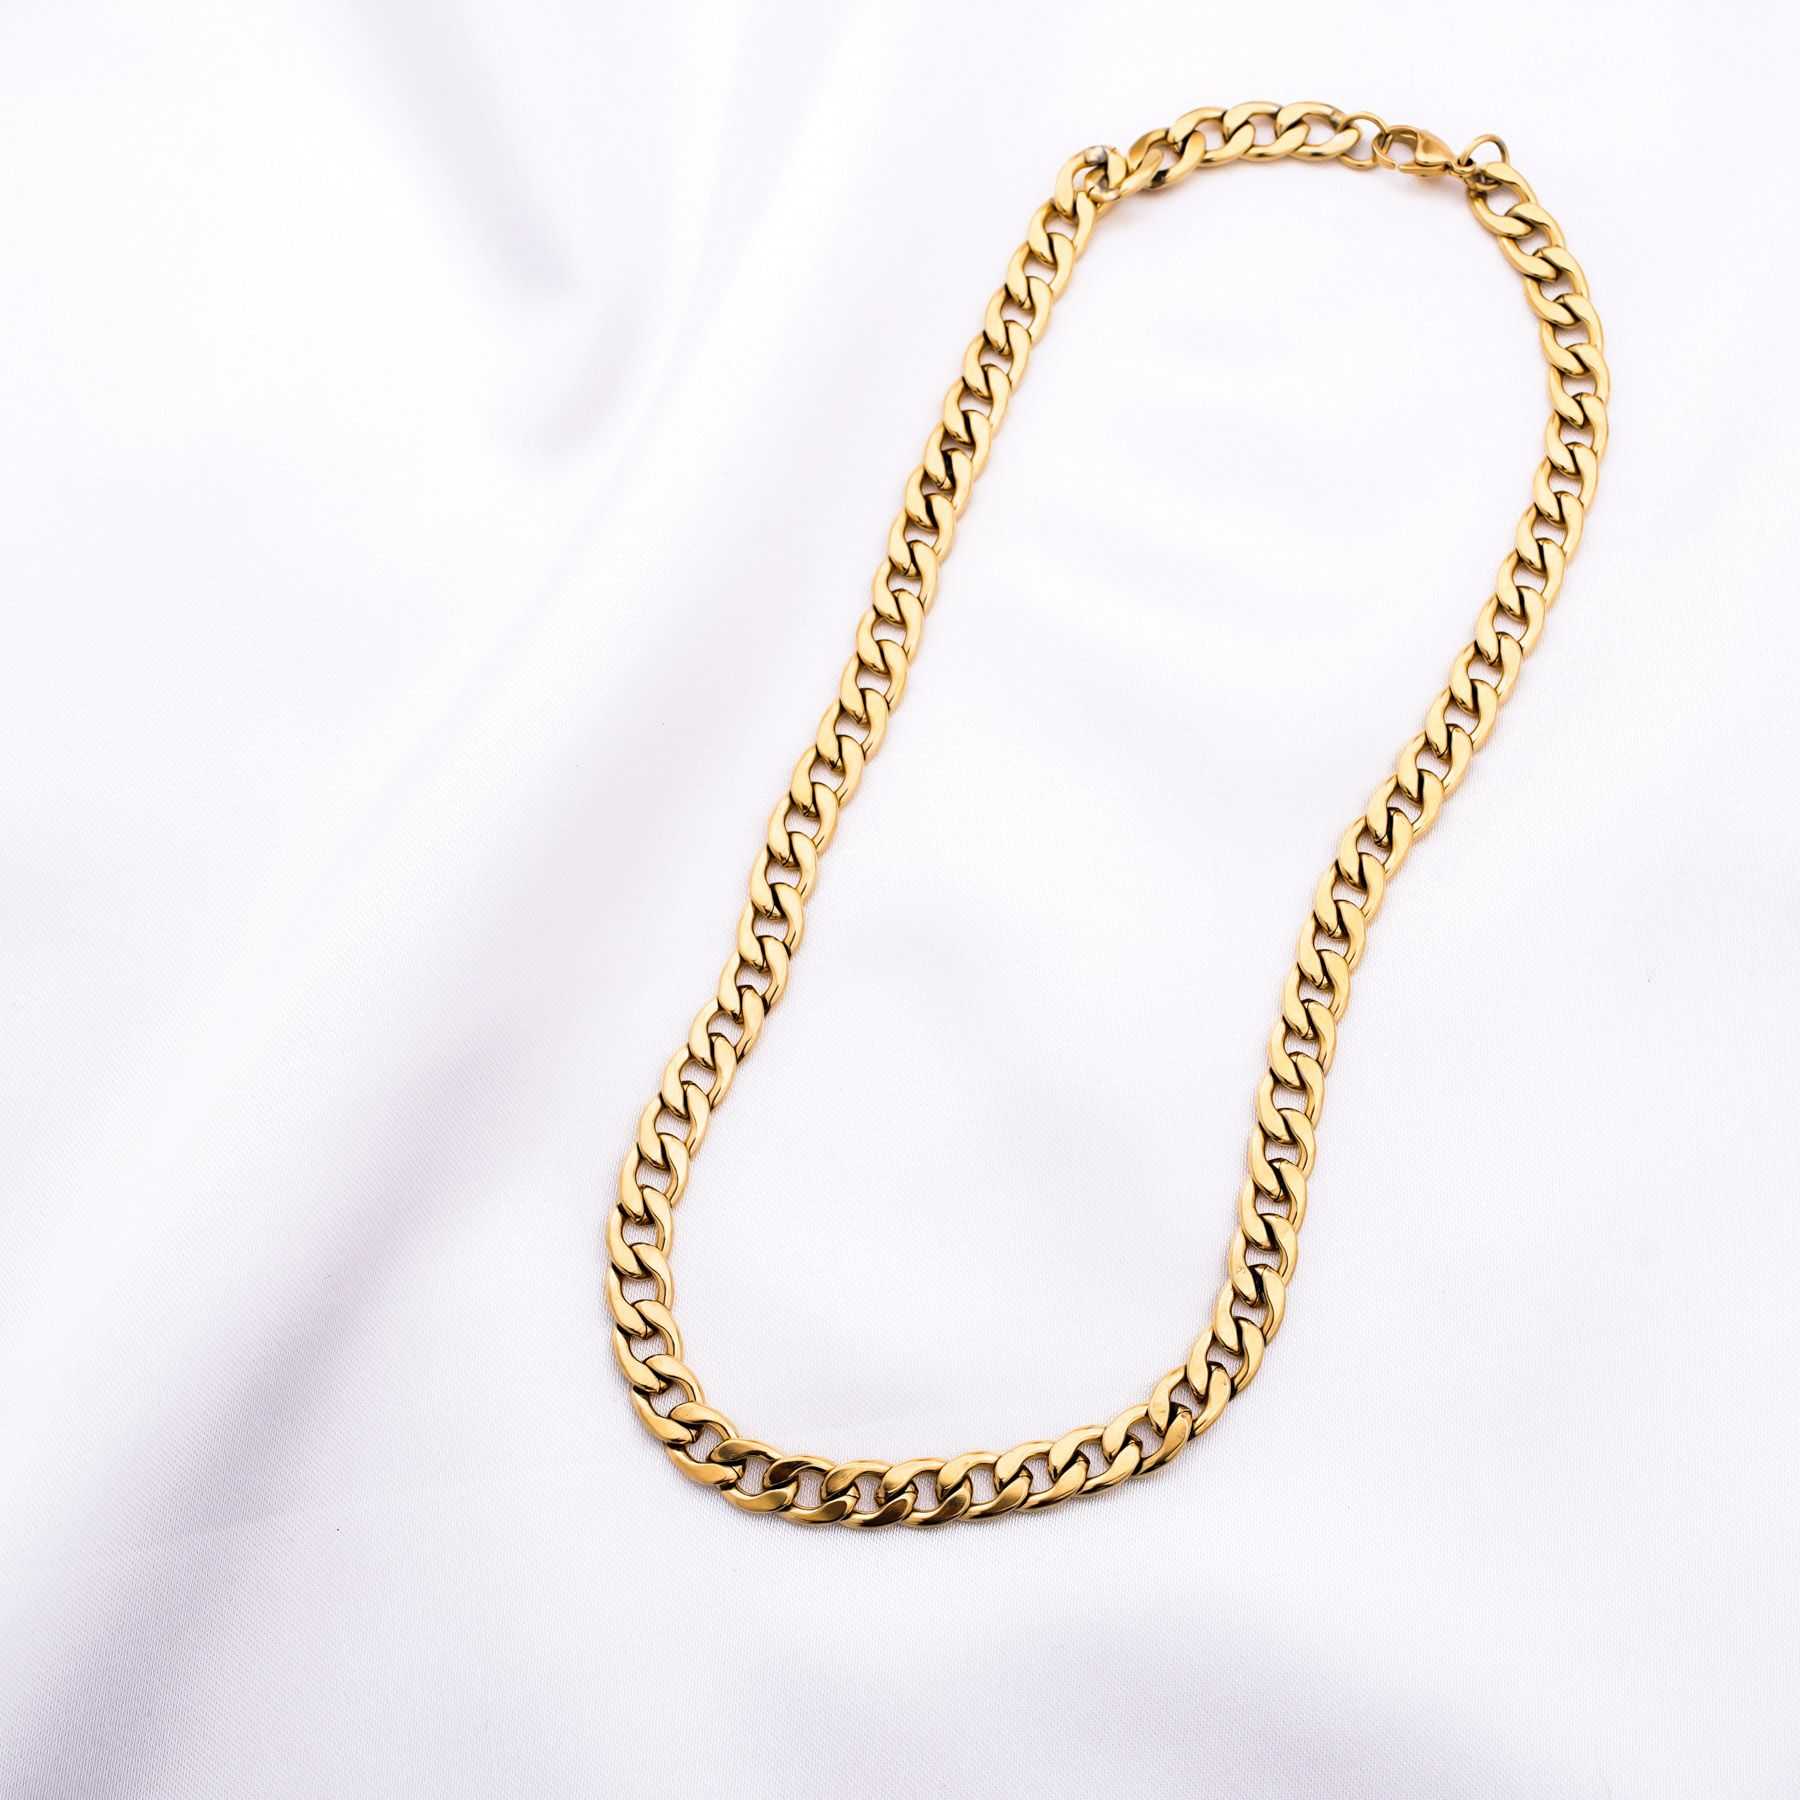 KYRA CHAIN NECKLACE - GOLD